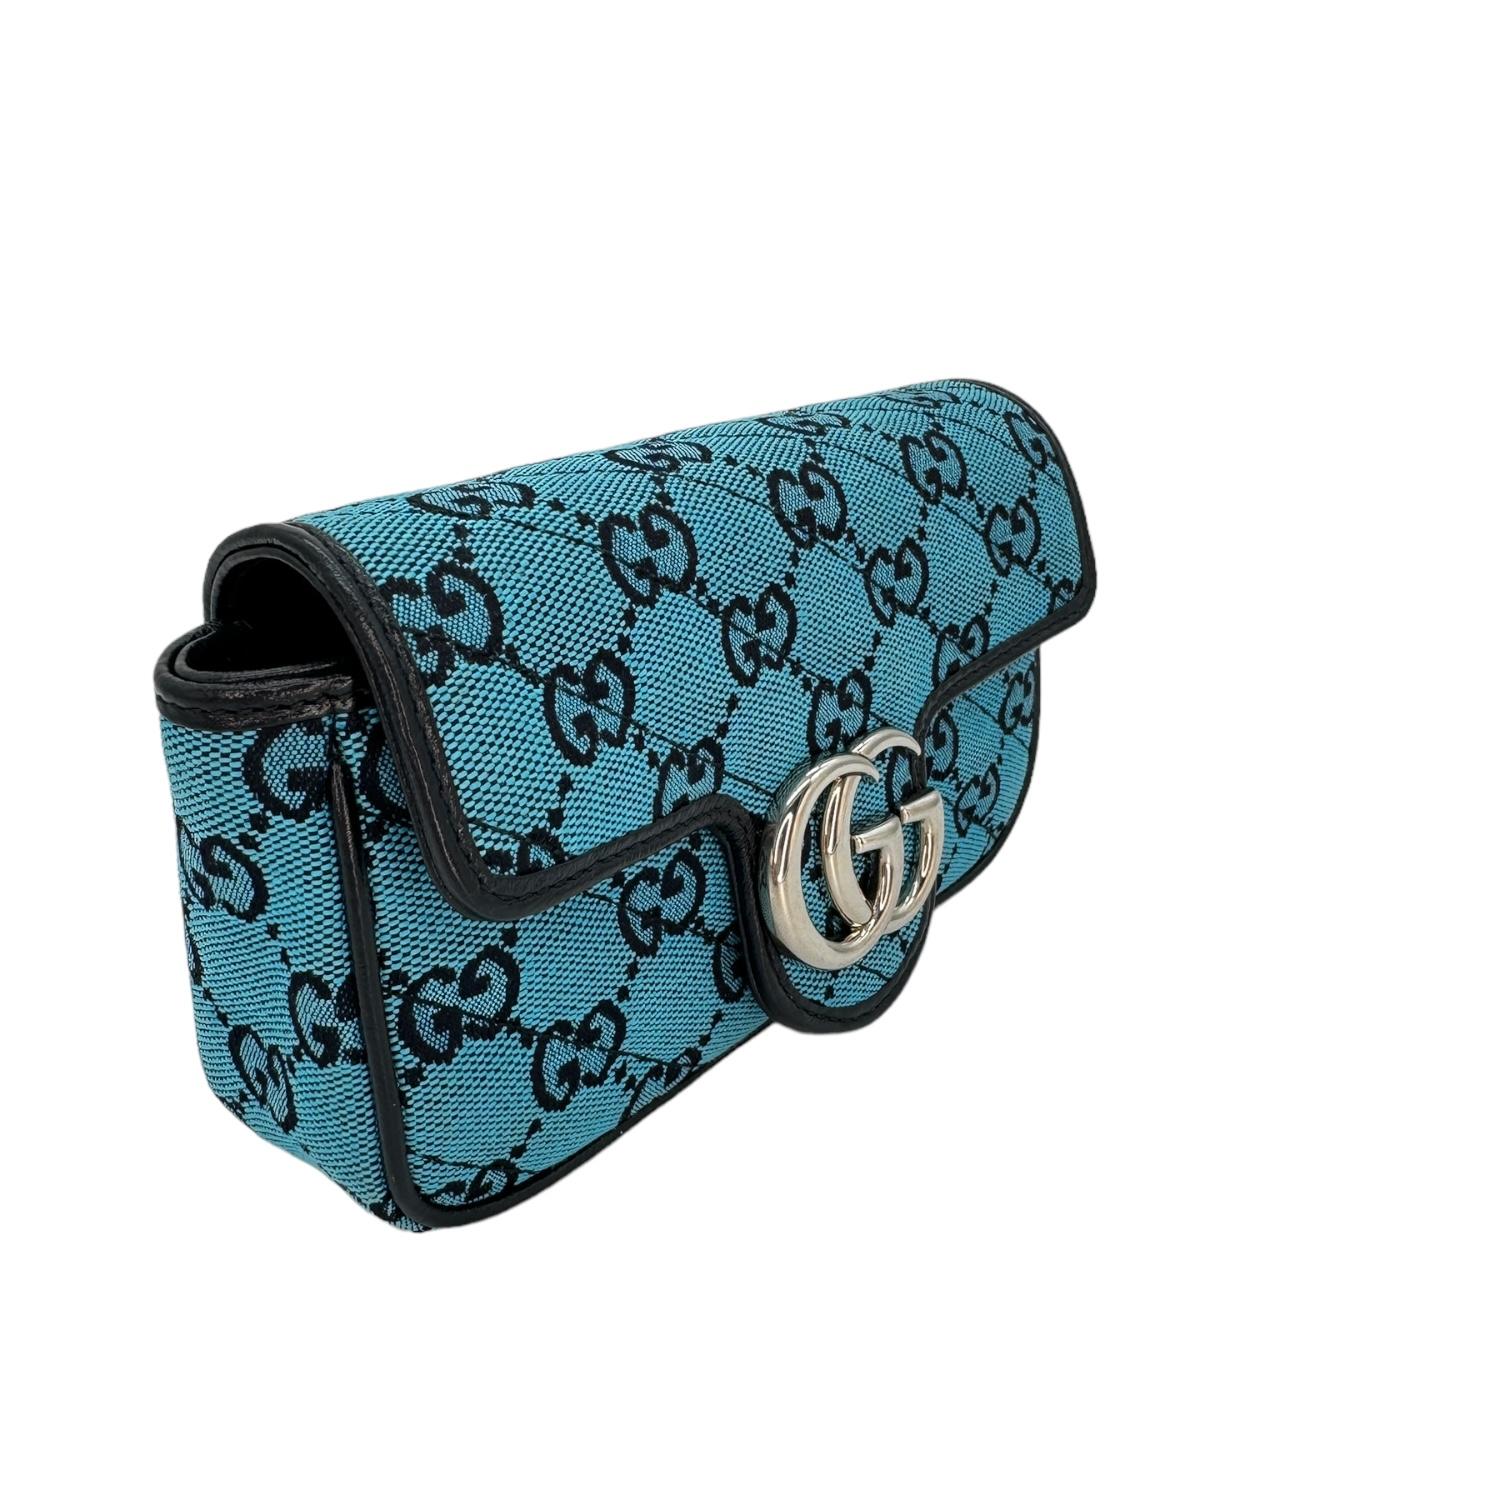 This shoulder bag is crafted of GG monogram canvas in blue. This bag features a polished silver chain shoulder strap and a front flap that features an interlocking GG logo. The flap opens to a beige fabric interior and includes a removable key